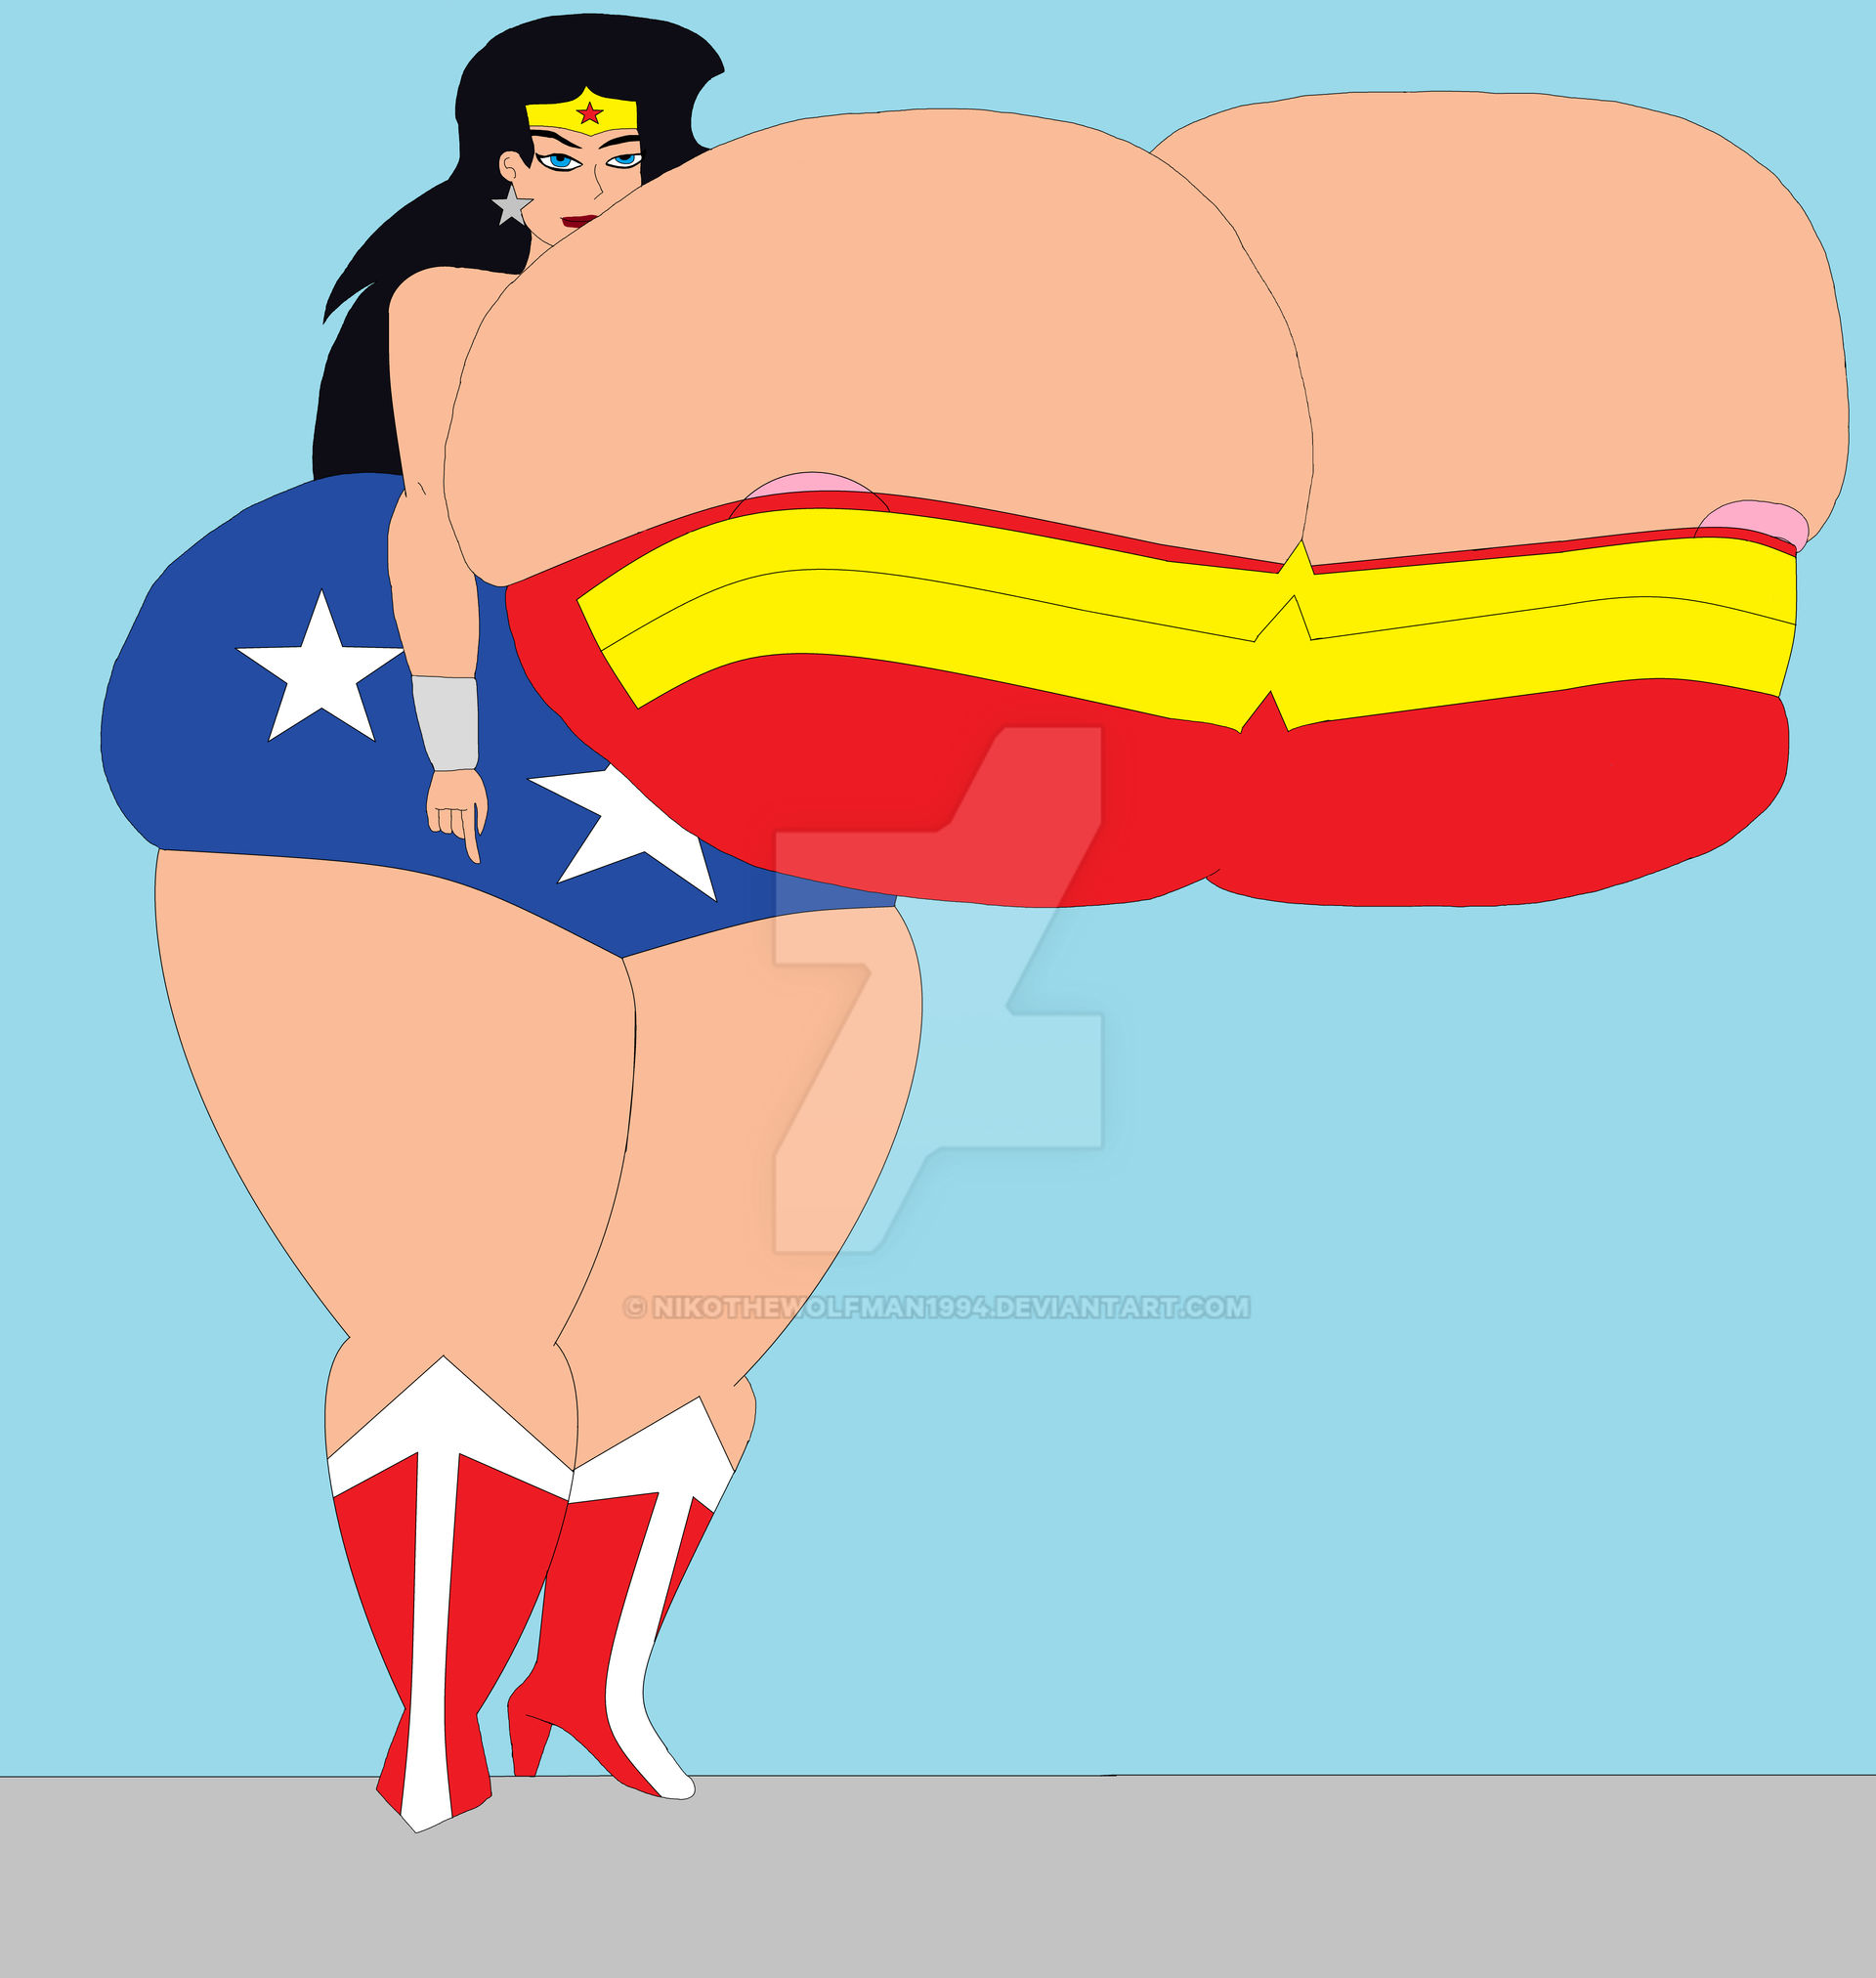 Sexy Hot Wonder Woman With Perfect Big Round Boobs by Creativision1 on  DeviantArt